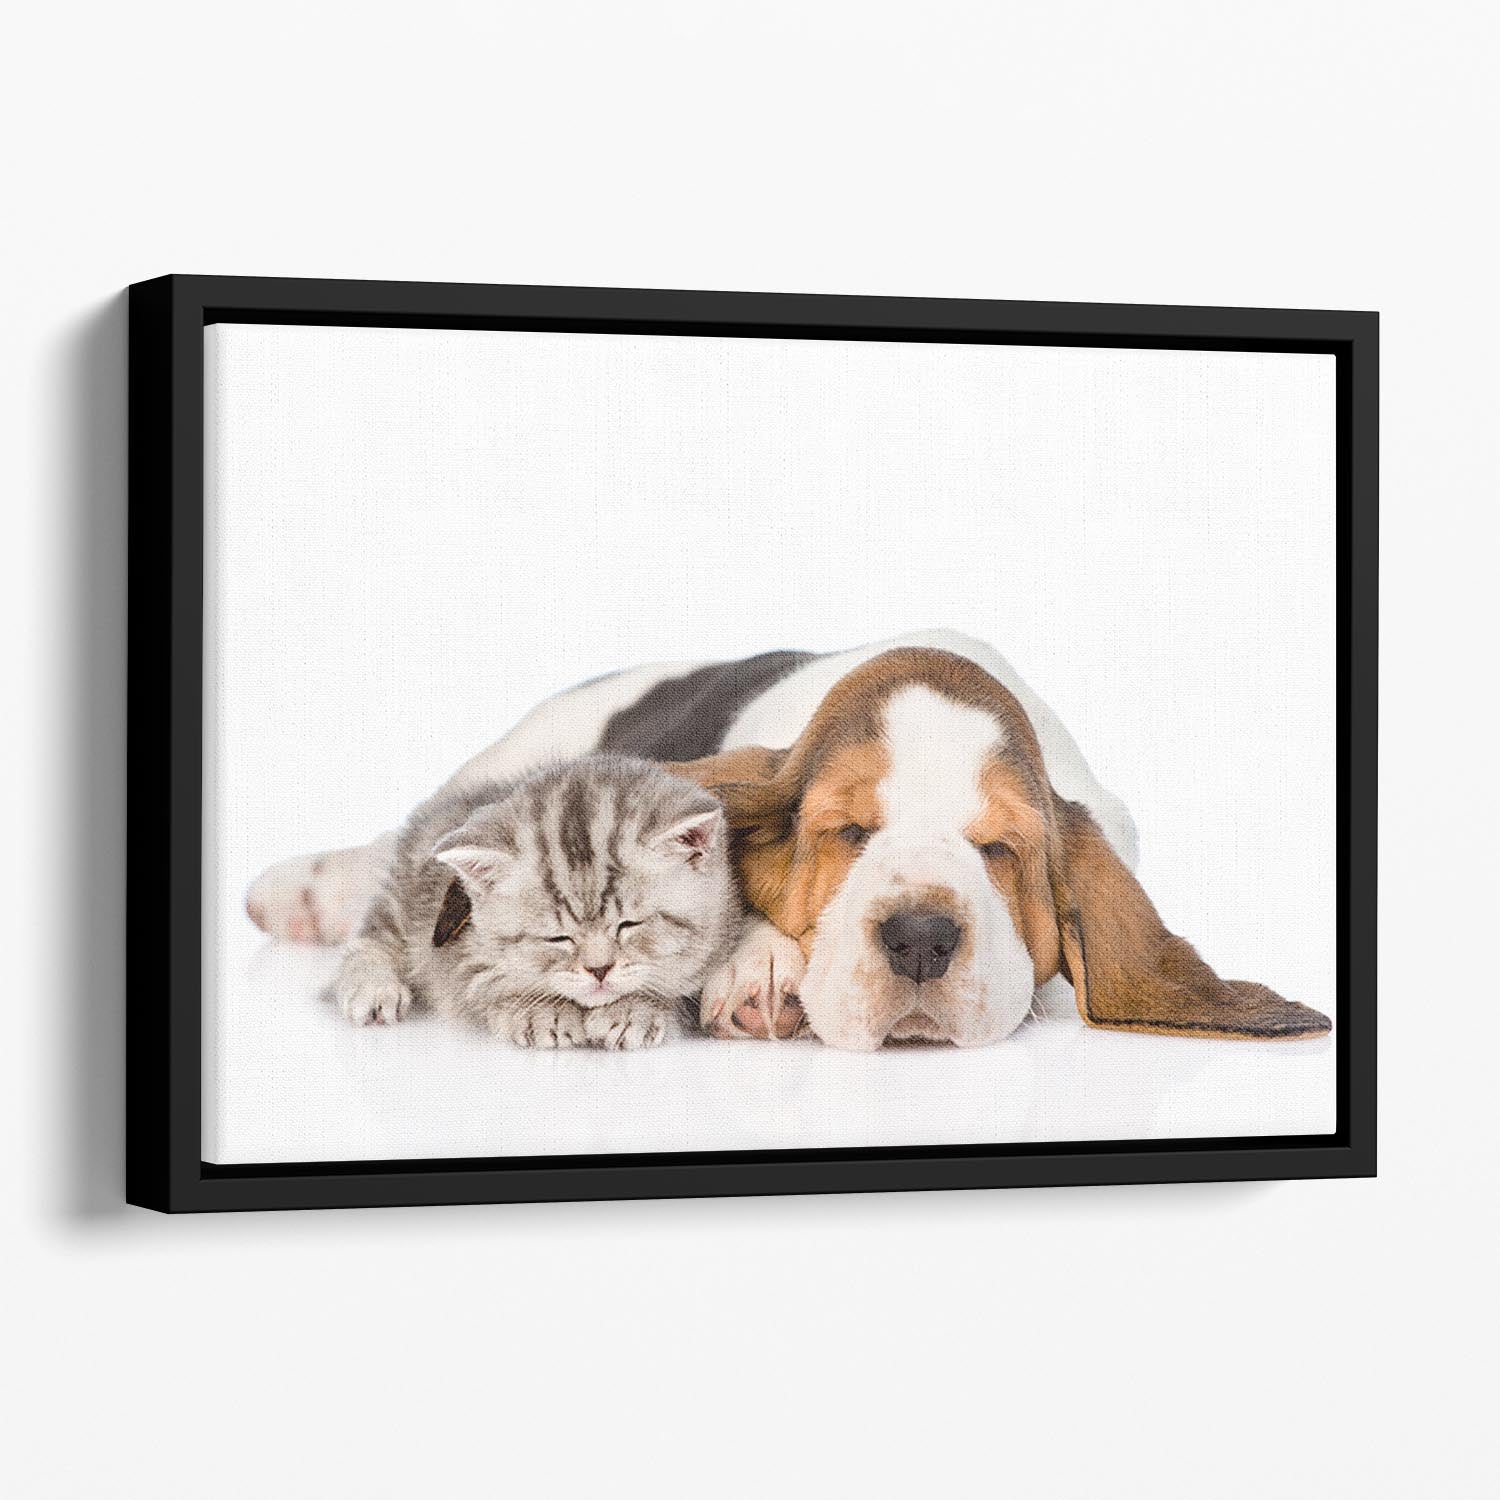 Kitten and puppy sleeping together. isolated on white background Floating Framed Canvas - Canvas Art Rocks - 1